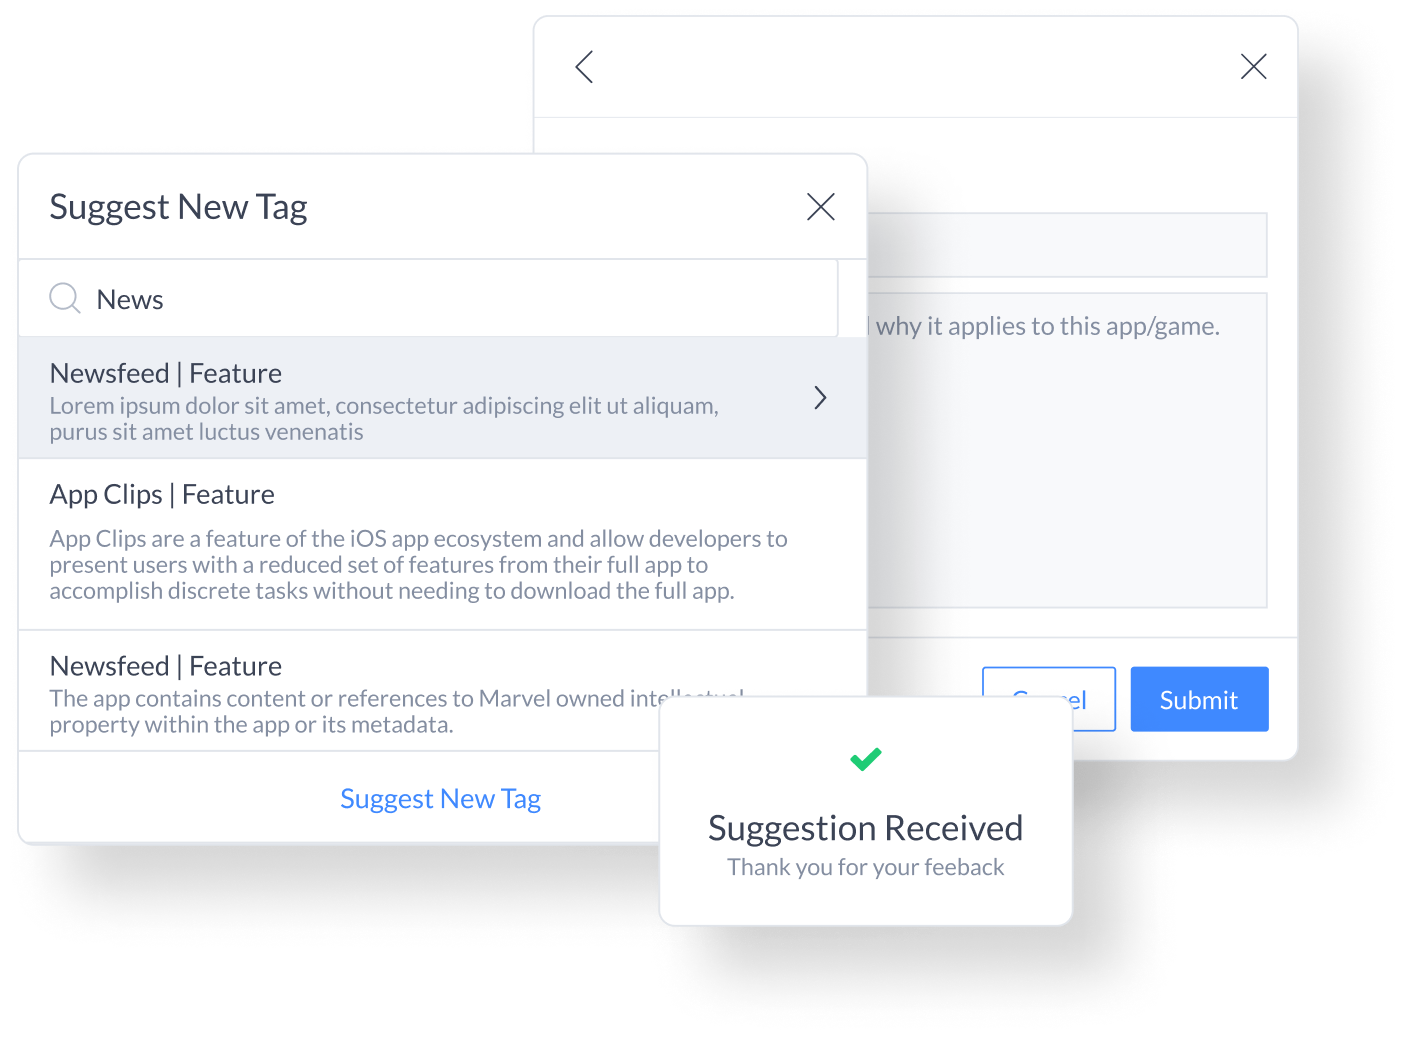 create a completely custom experience by suggesting new tags